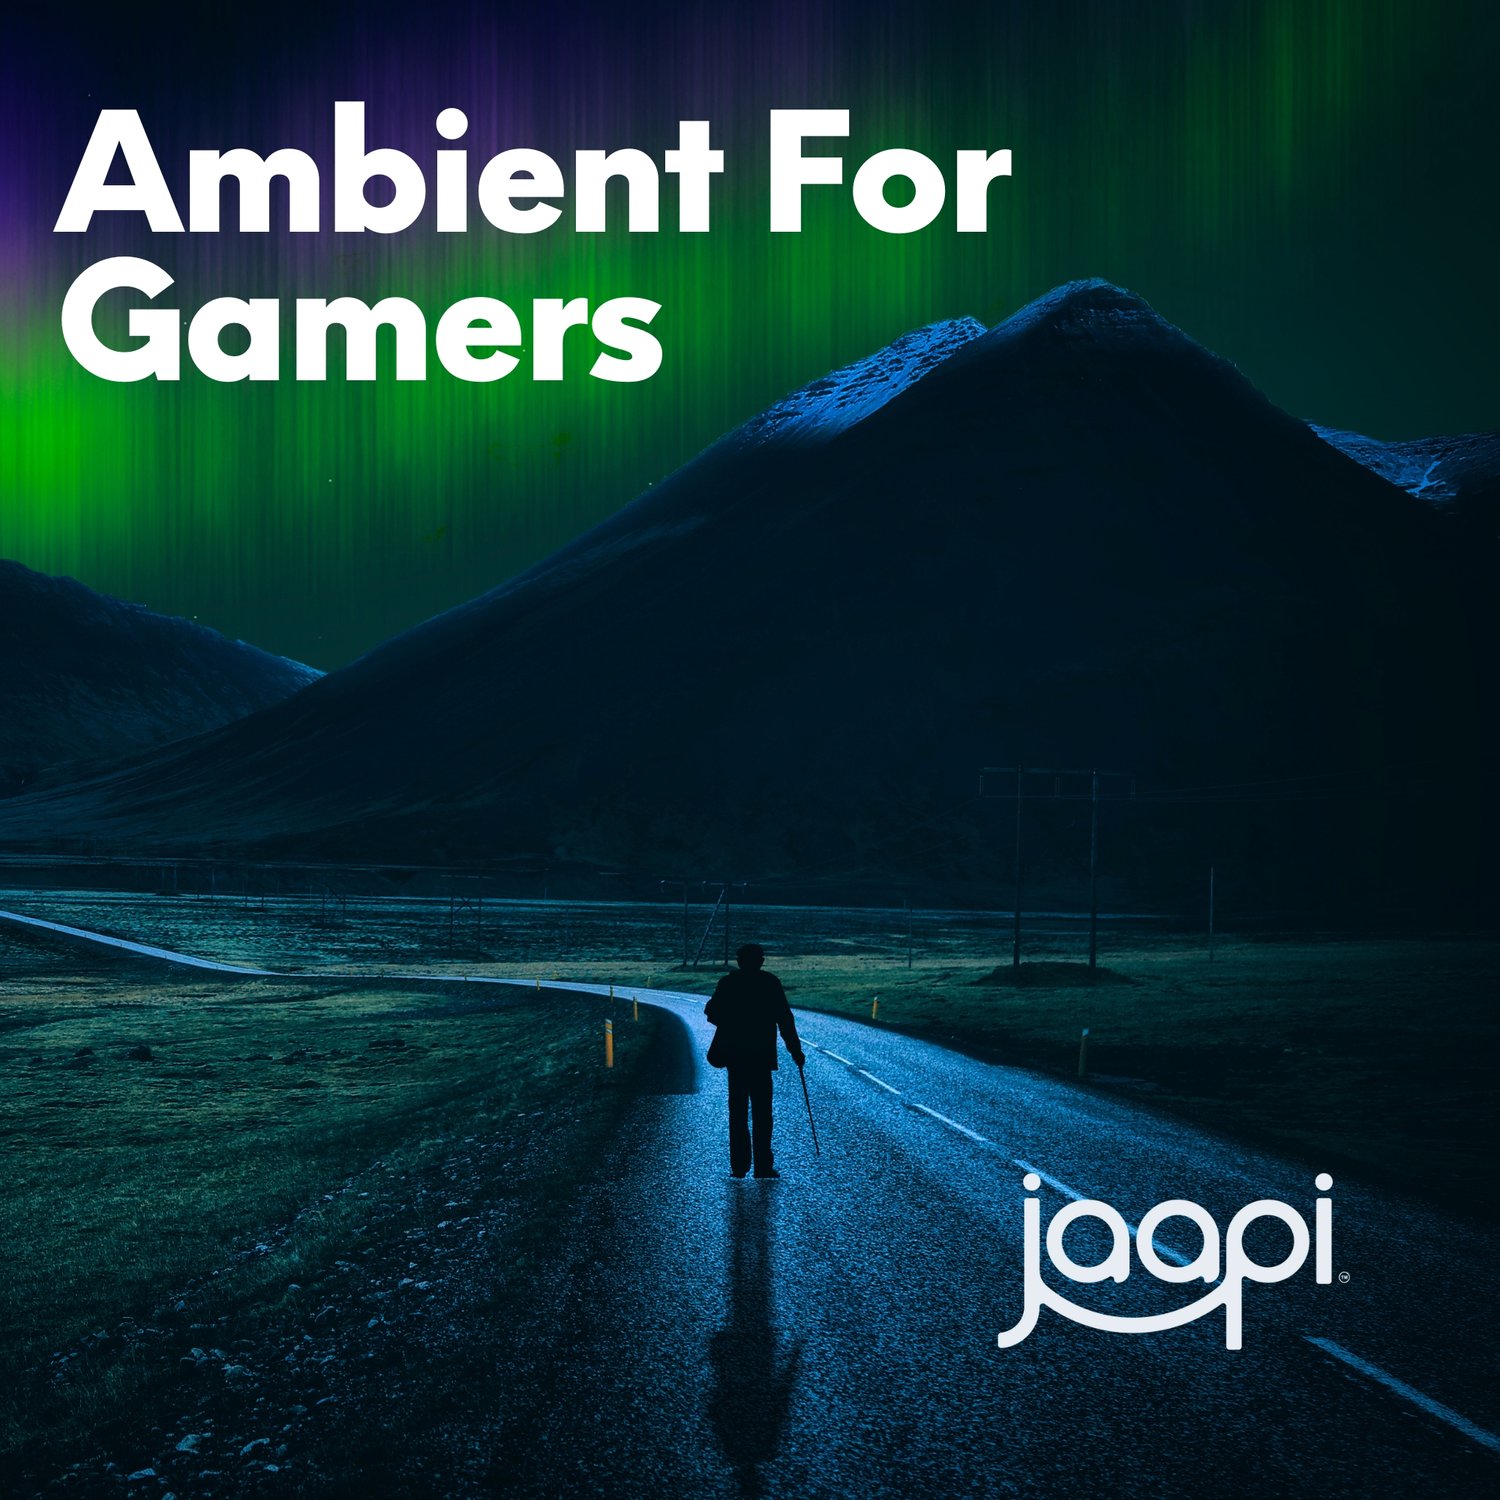 Ambient For Gamers: Lush sonic textures for gamers. Curated by Jaapi Media.